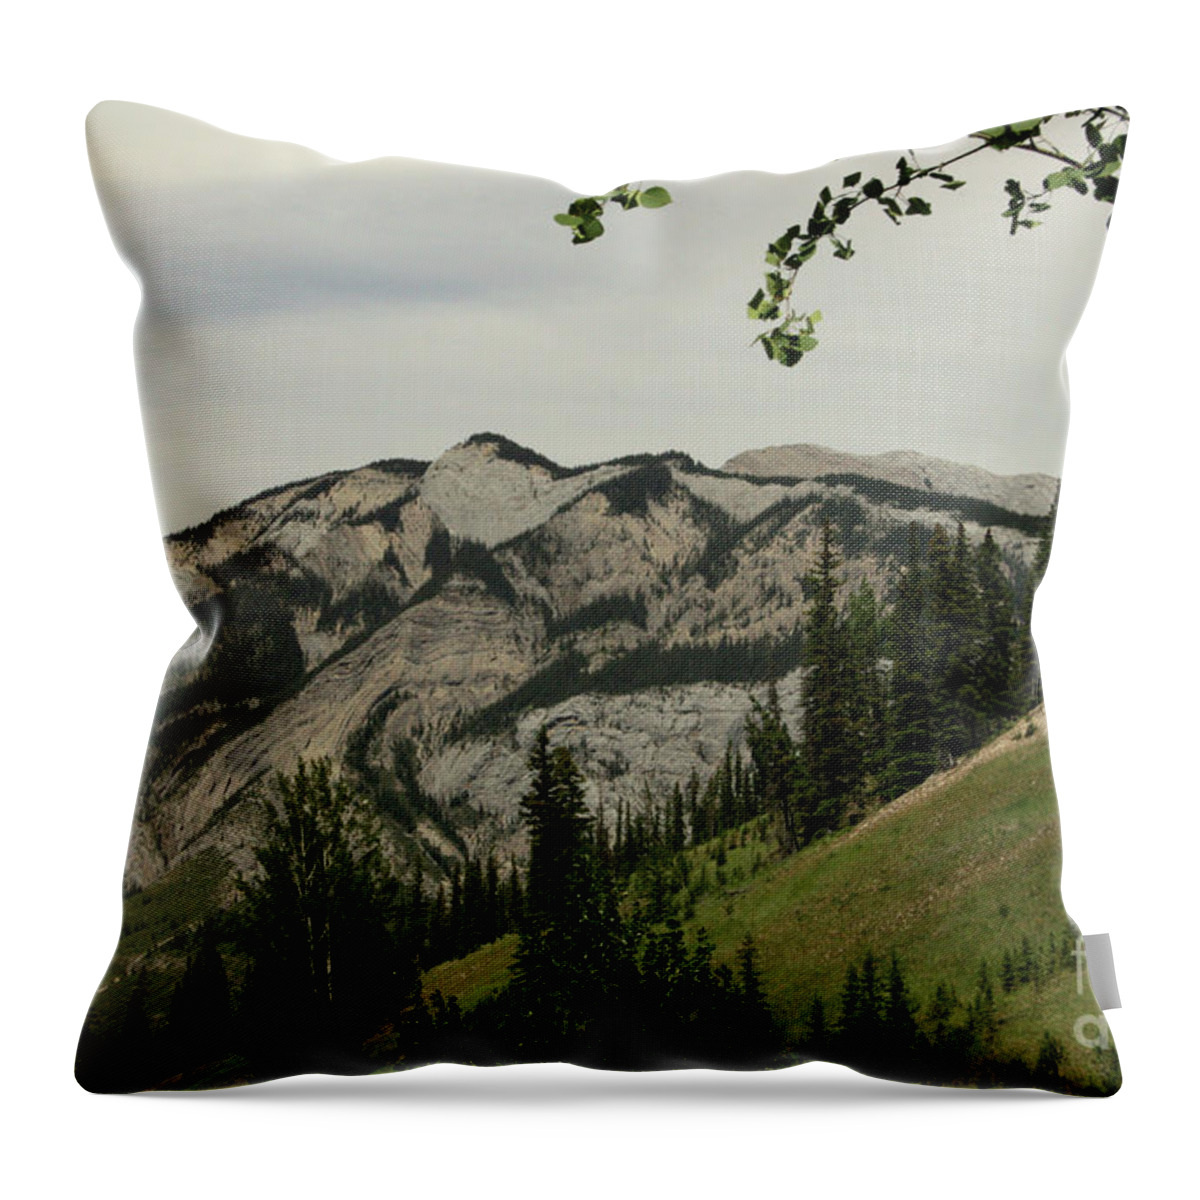 Beautiful Throw Pillow featuring the photograph Swirly Top Mountain by Mary Mikawoz